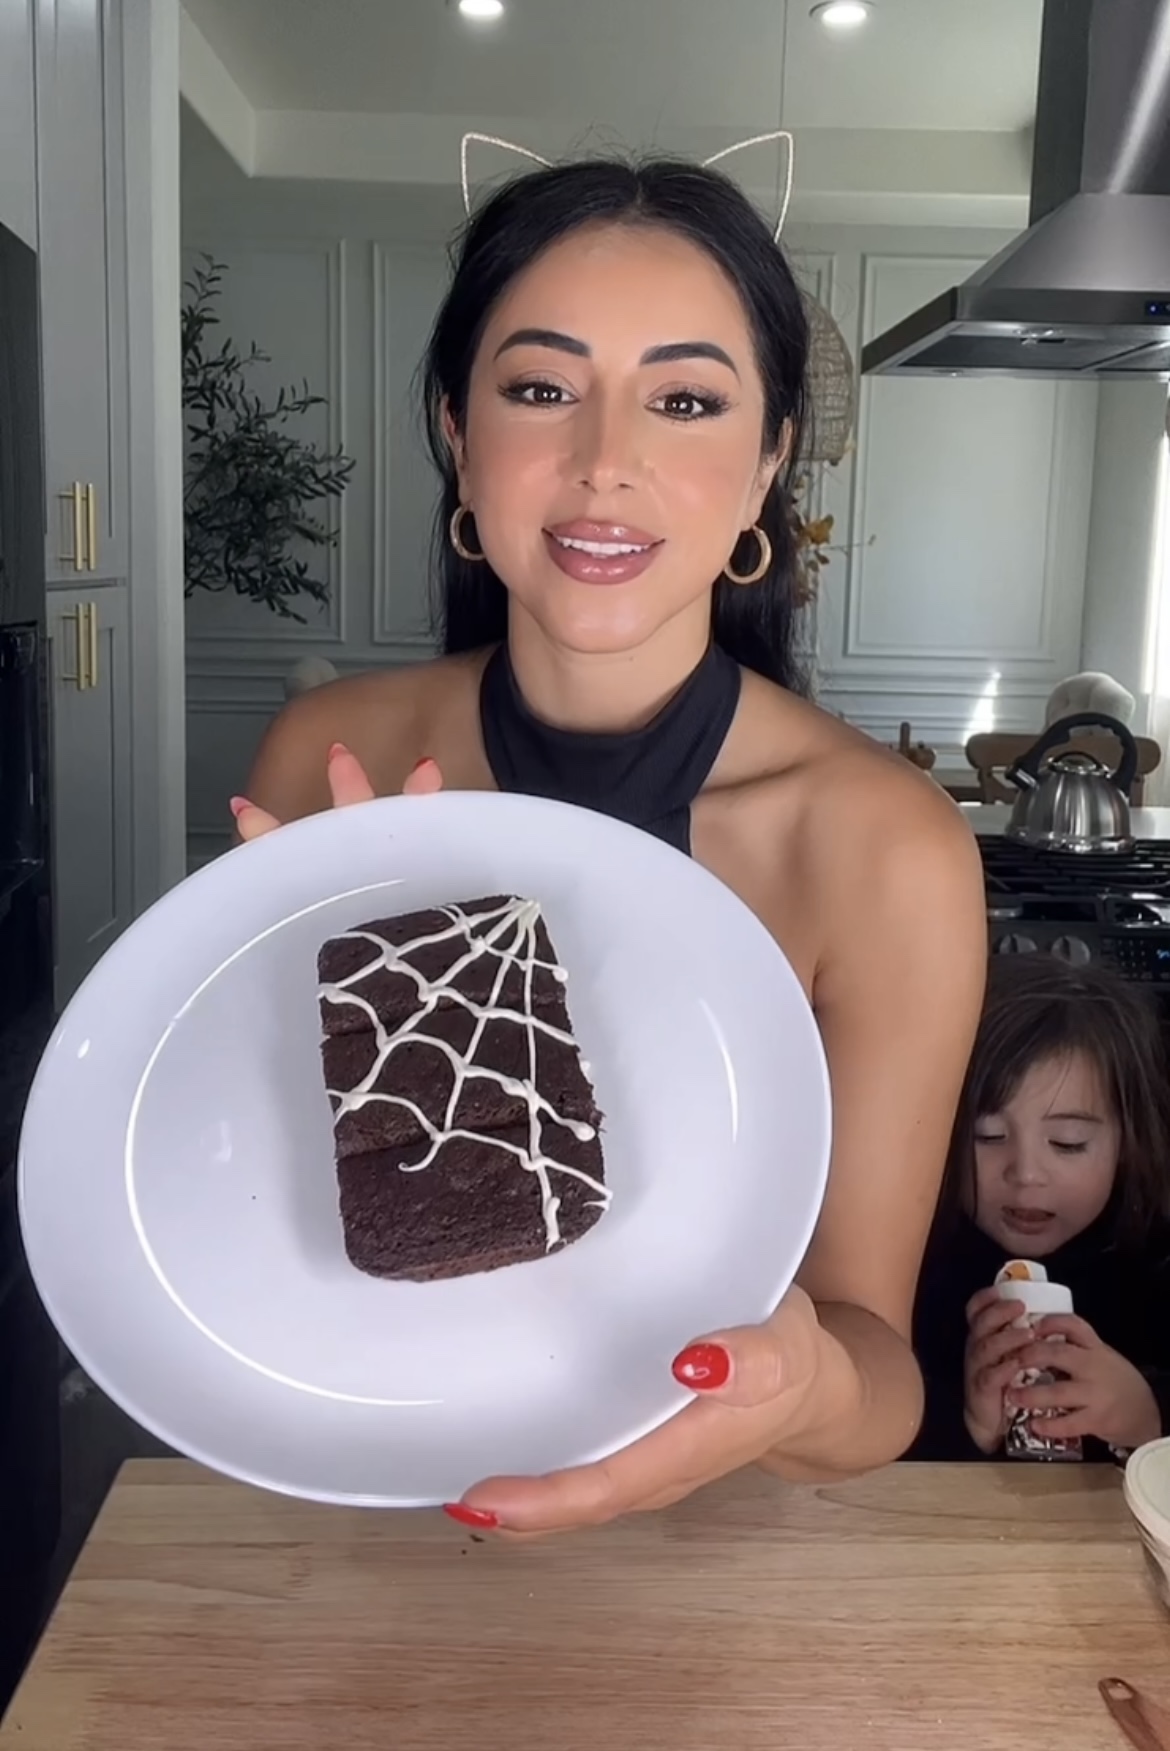 woman wearing halloween cat ears holding a plate with chocolate brownies decorated with a white chocolate spider web